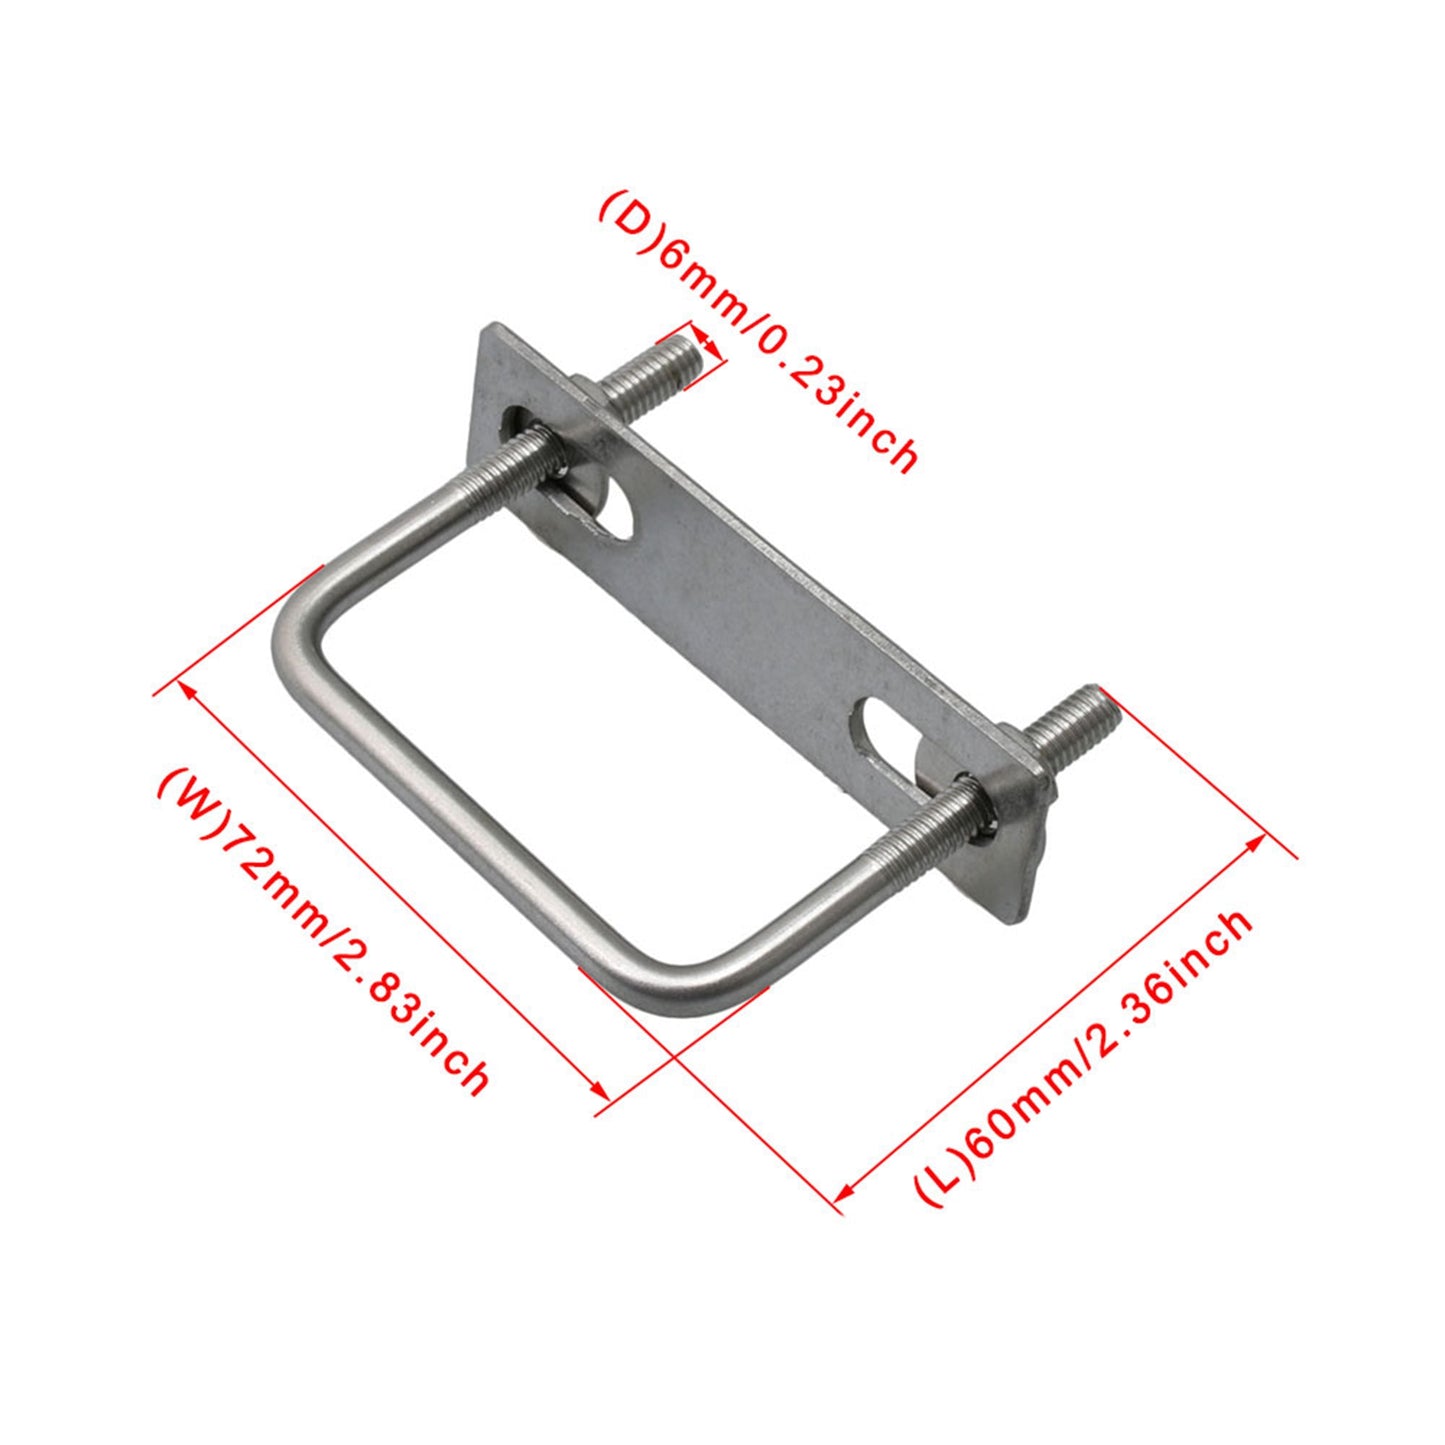 BQLZR 60mm Inner Width Silver Stainless Steel M6 Thread U Shape Bolt with Rectangle Plate Nuts and Washers for Pipe Fasterning